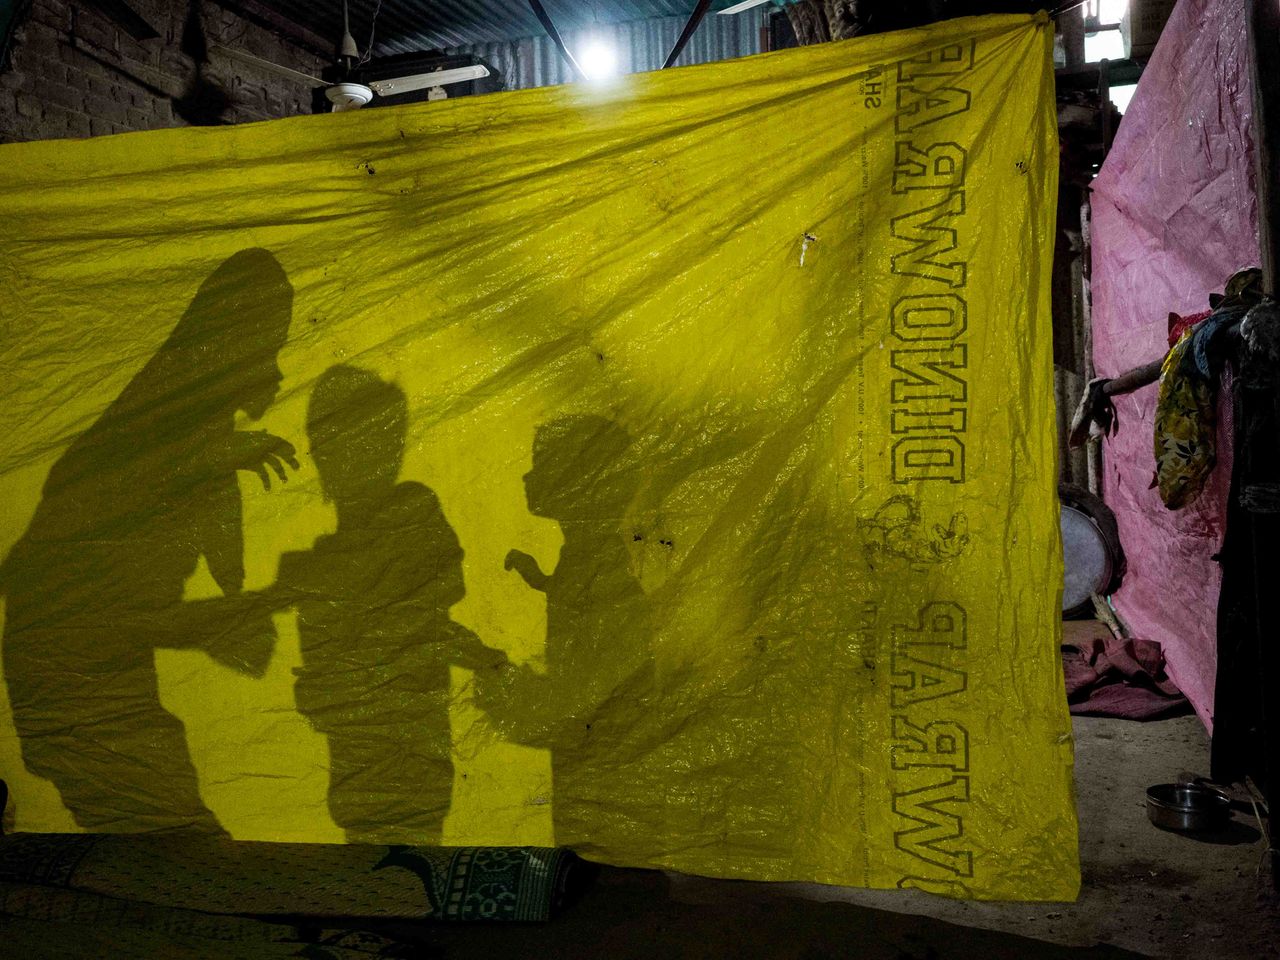 A displaced Muslim family use a plastic sheet as wall partition inside what once was a stable after their home was demolished by the authorities following communal violence in a drive that they claim was against encroachment in Khas-Khas wadi, Khargone in India's Madhya Pradesh state on April 15, 2022. As a national campaign by right-wing groups inflames local tensions, Muslim communities are facing the harshest punishments, according to activists, analysts and retired officials.